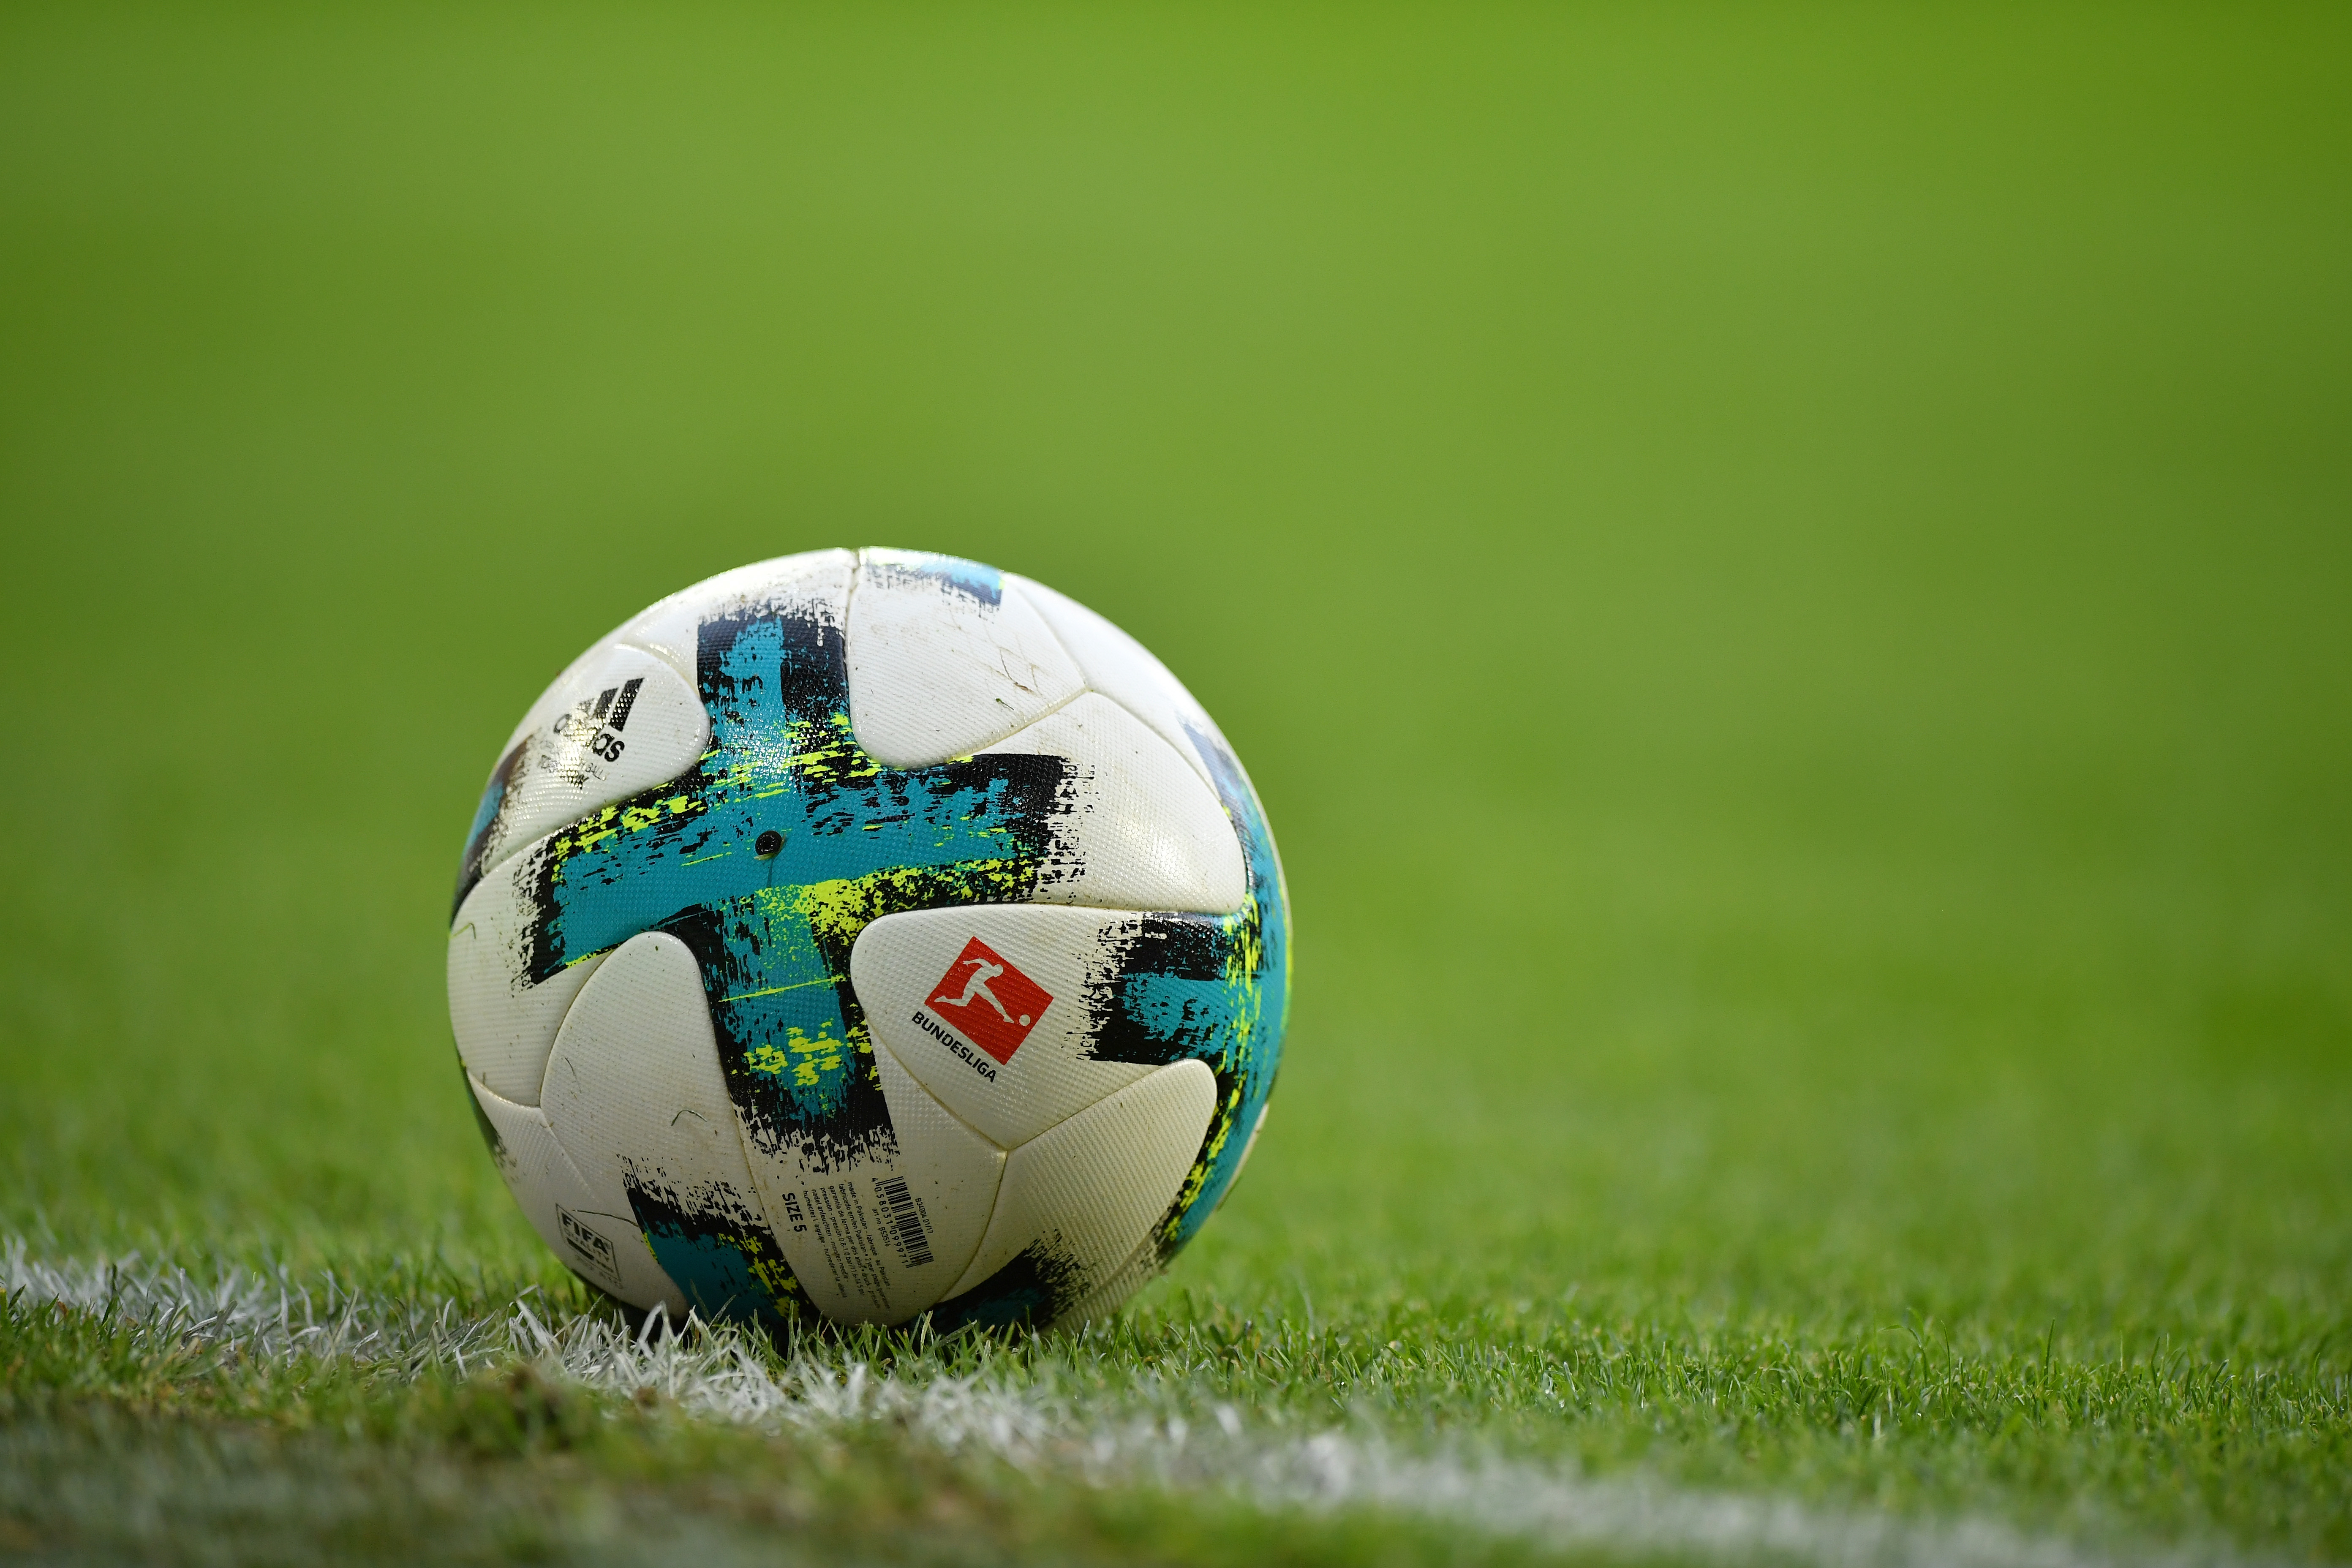 AUGSBURG, GERMANY - NOVEMBER 04: The ball with the Bundesliga logo lies on the pitch during the Bundesliga match between FC Augsburg and Bayer 04 Leverkusen at WWK-Arena on November 4, 2017 in Augsburg, Germany. (Photo by Sebastian Widmann/Bongarts/Getty Images)